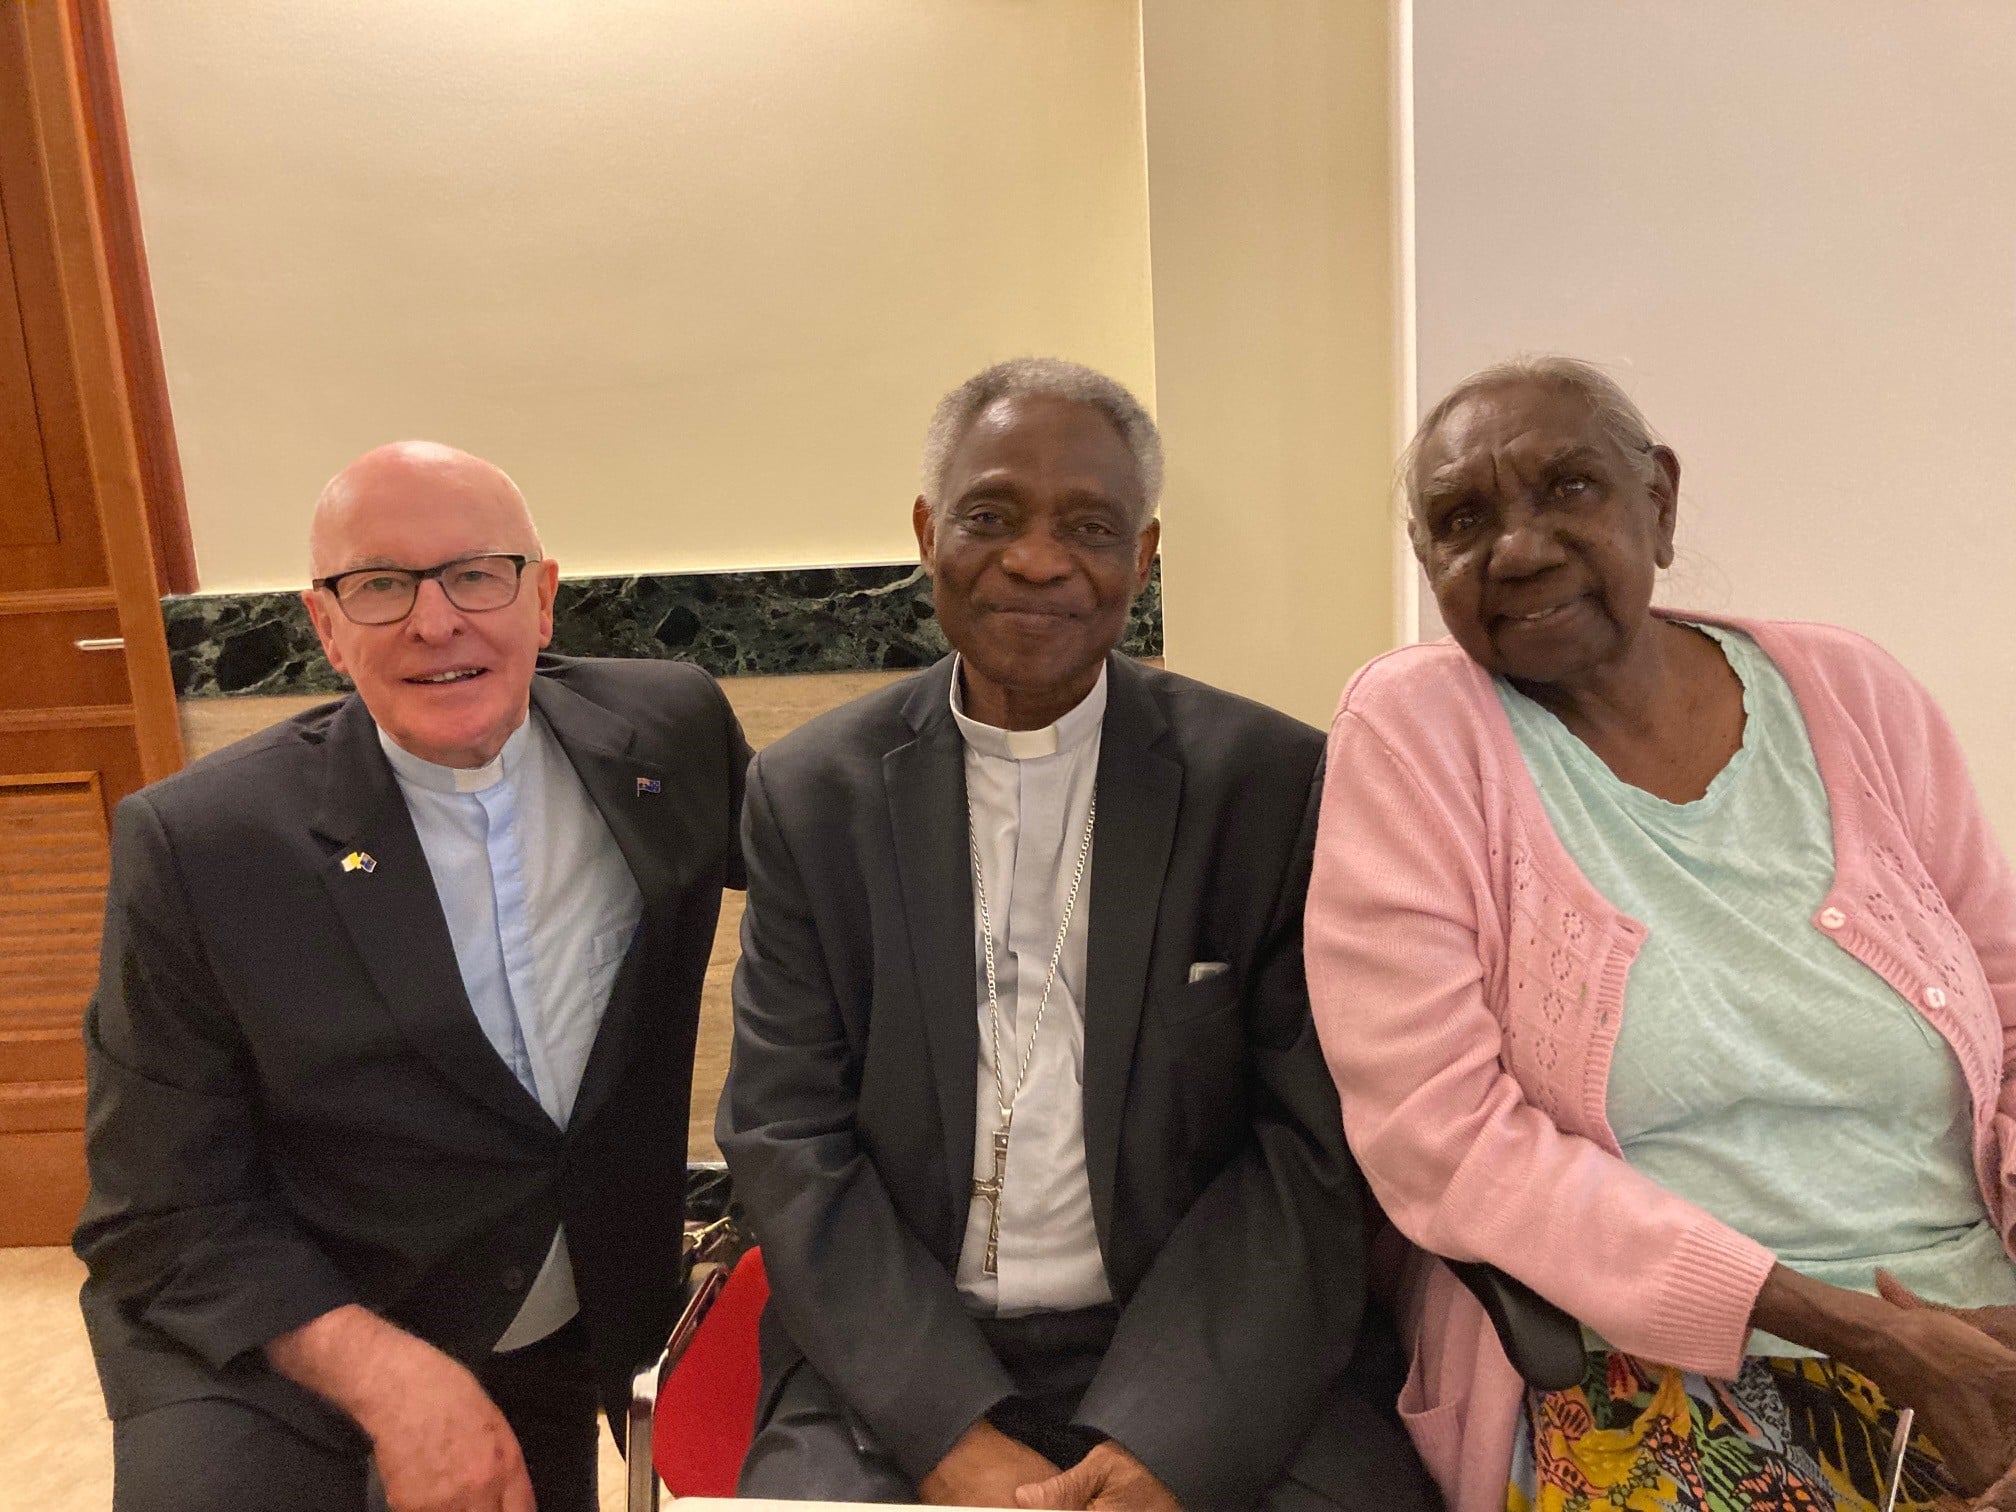 Cardinal Turkson with Dr Miriam-Rose and Father Robert Hayes during the Reception. Photo: Supplied